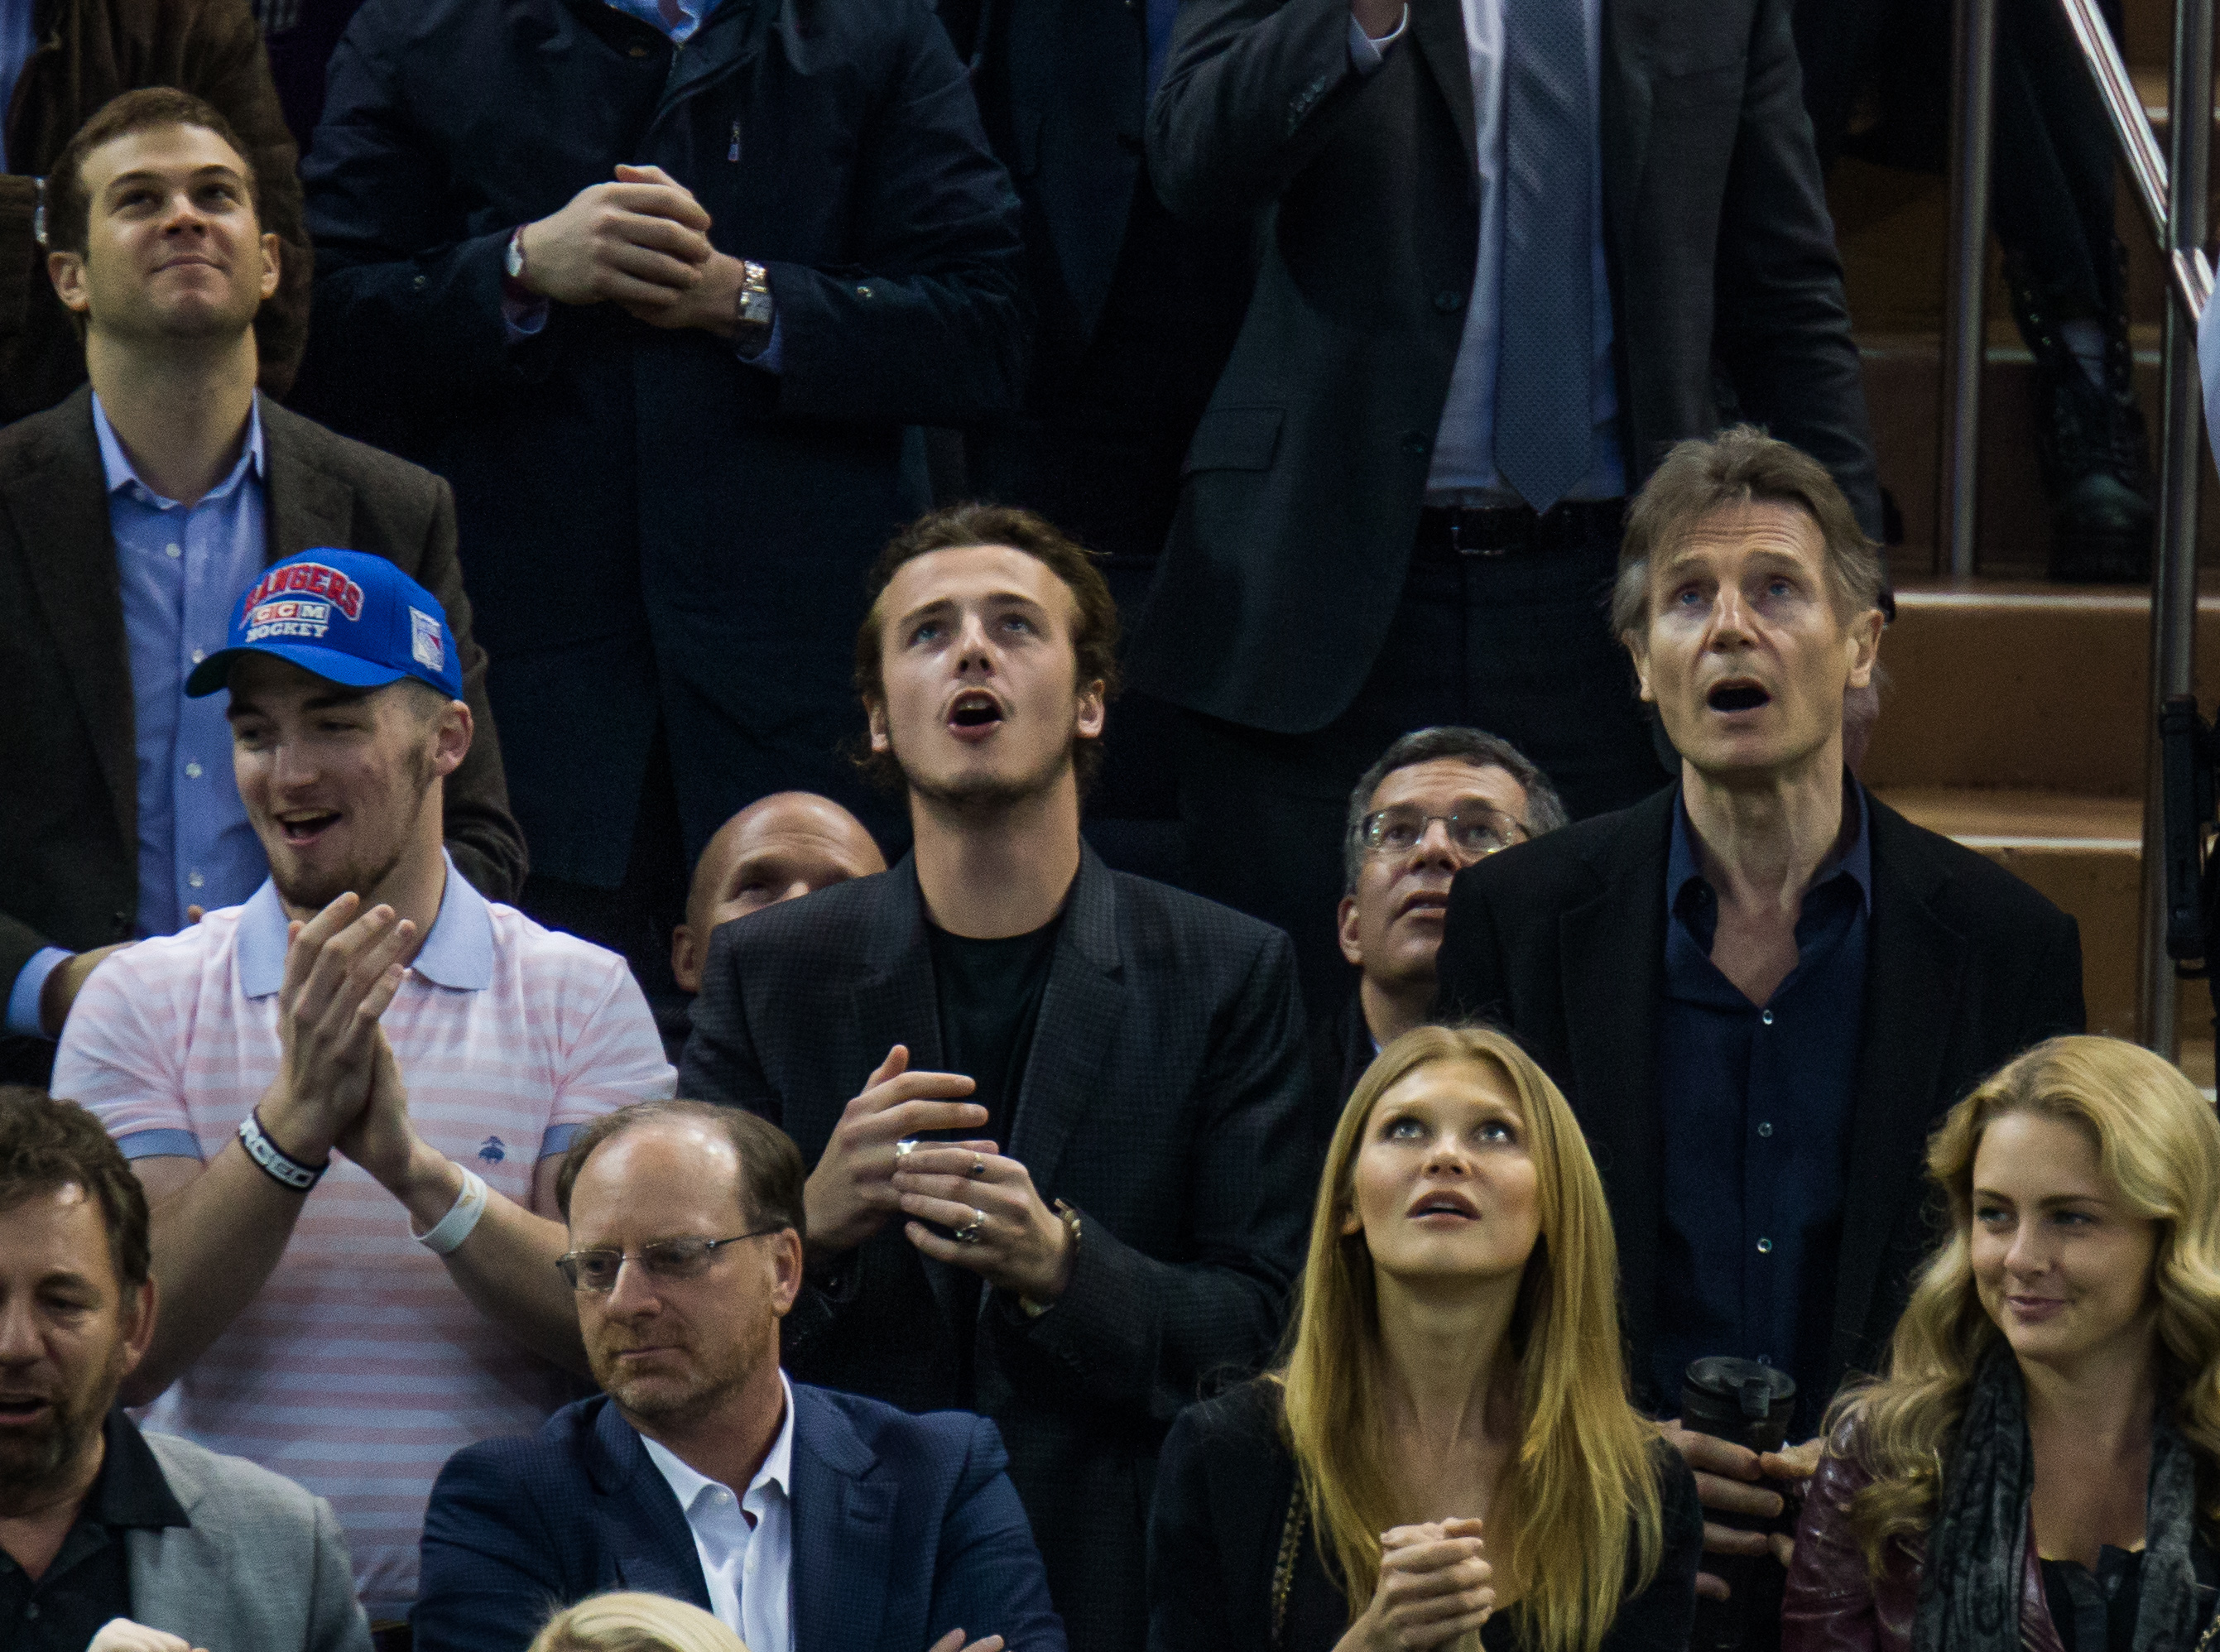 Daniel Neeson, Micheál Richardson and Liam Neeson at a New York Rangers Vs. Boston Bruins game in New York City on March 23, 2016 | Source: Getty Images